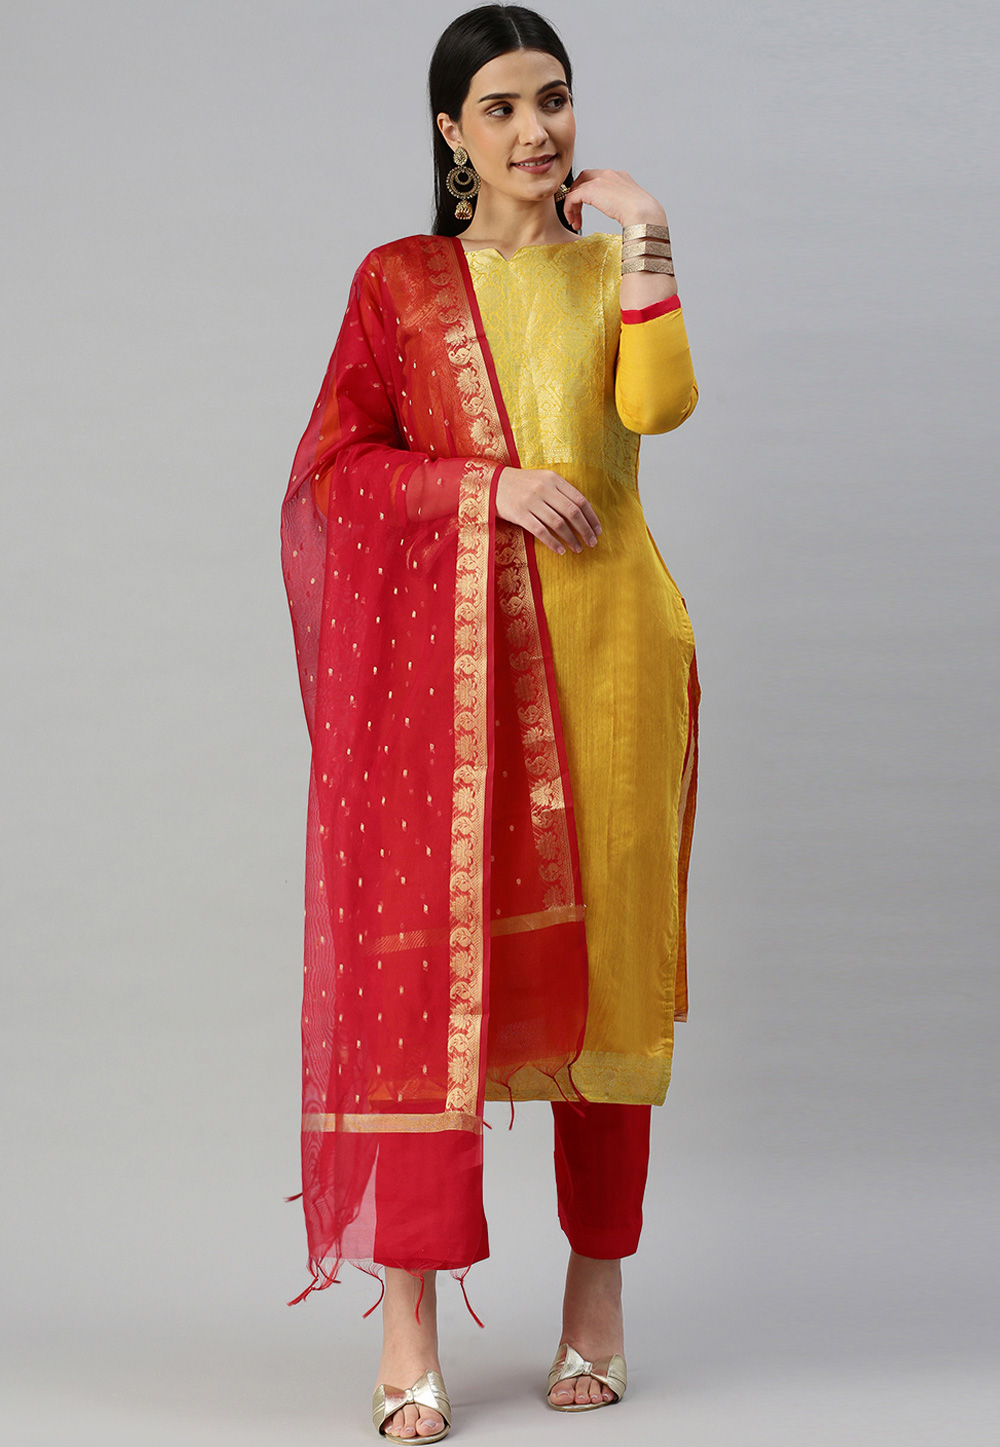 50 Latest Yellow Salwar Suit Designs for Weddings and Festivals (2022) -  Tips and Beauty | Simple indian suits, Suit designs, Punjabi outfits